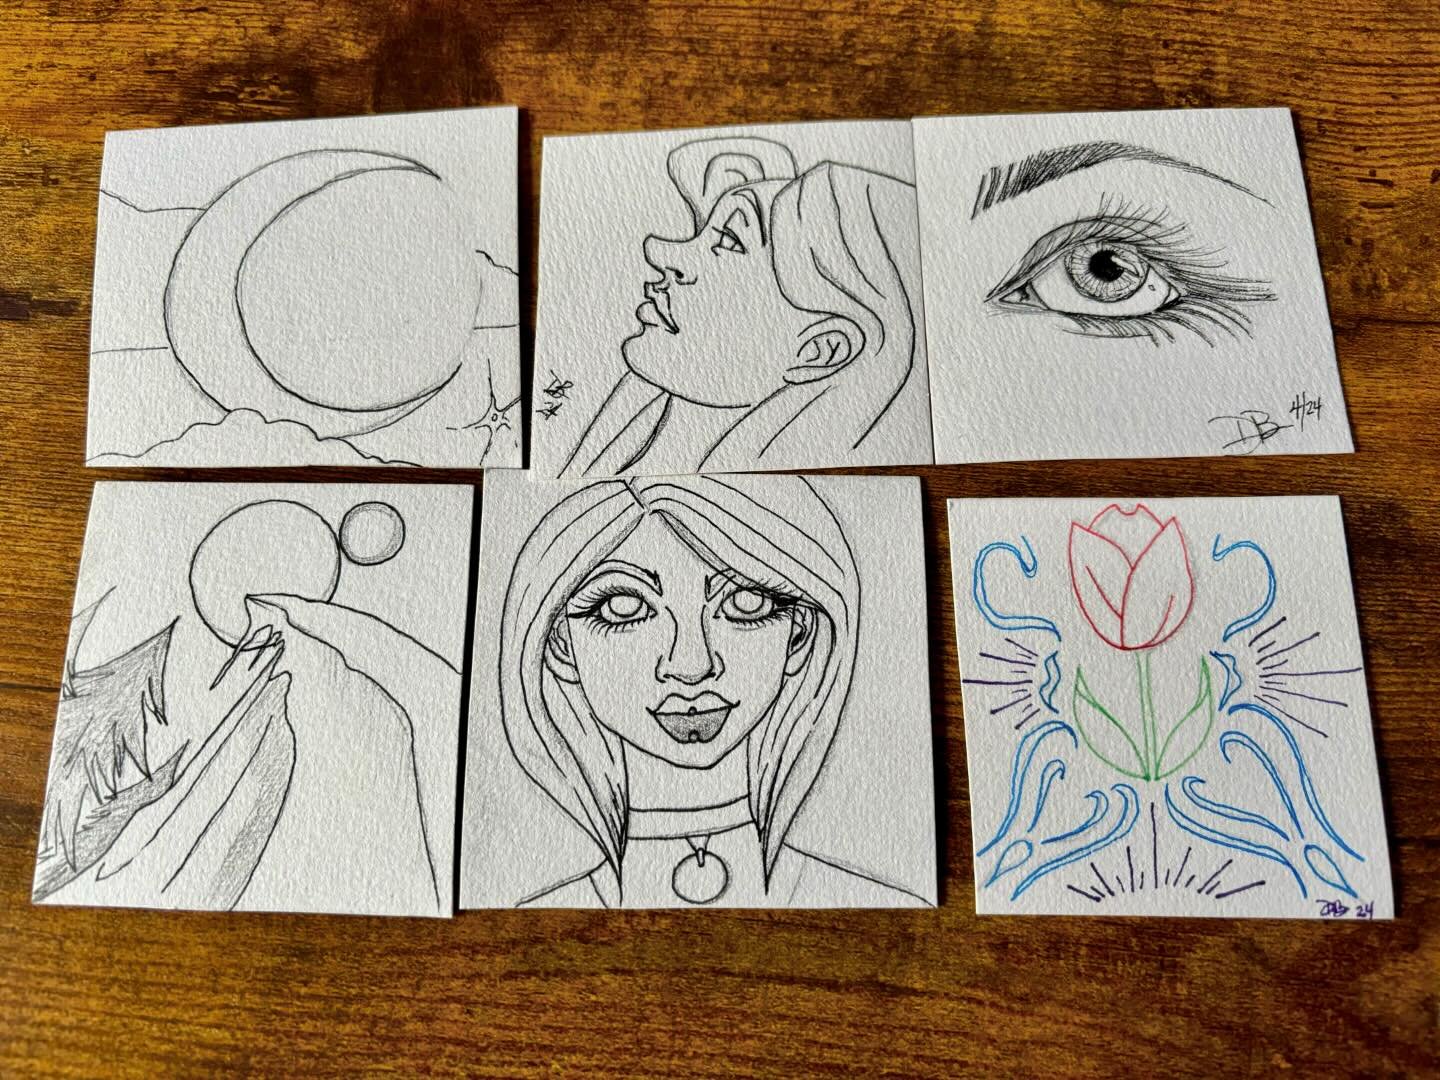 Been making these little art cards to go in letters I send out. They still need watercolor or ink, but then they&rsquo;ll be done ☺️ #art #drawing #artistsoninstagram #artist #doodle #handdrawn